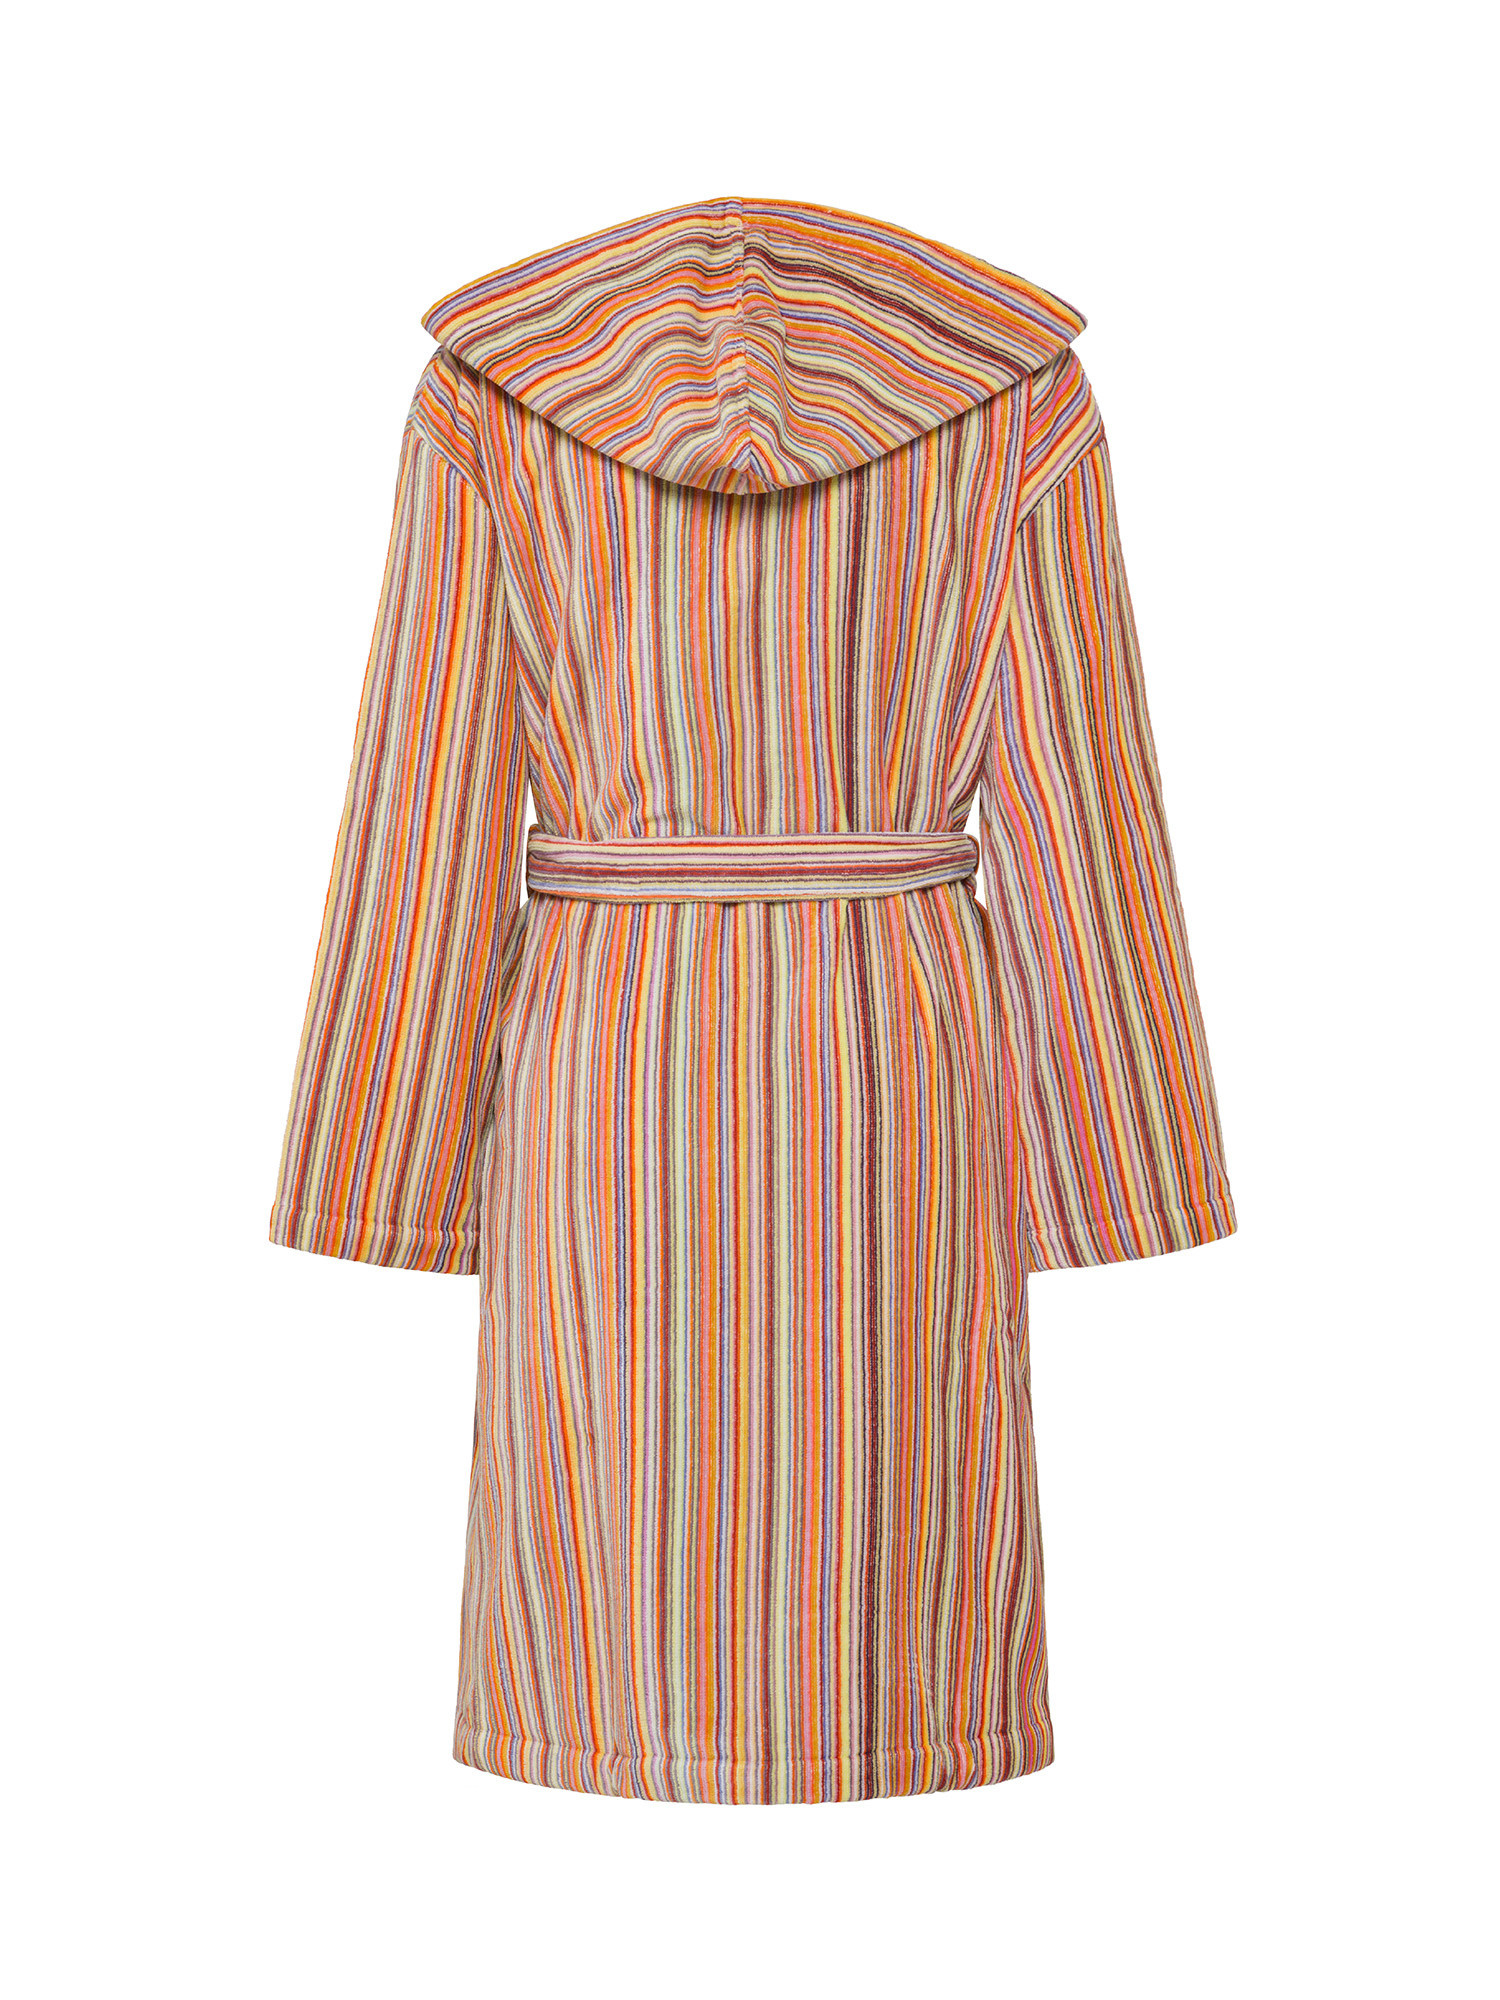 Velor cotton bathrobe with striped pattern, Multicolor, large image number 1